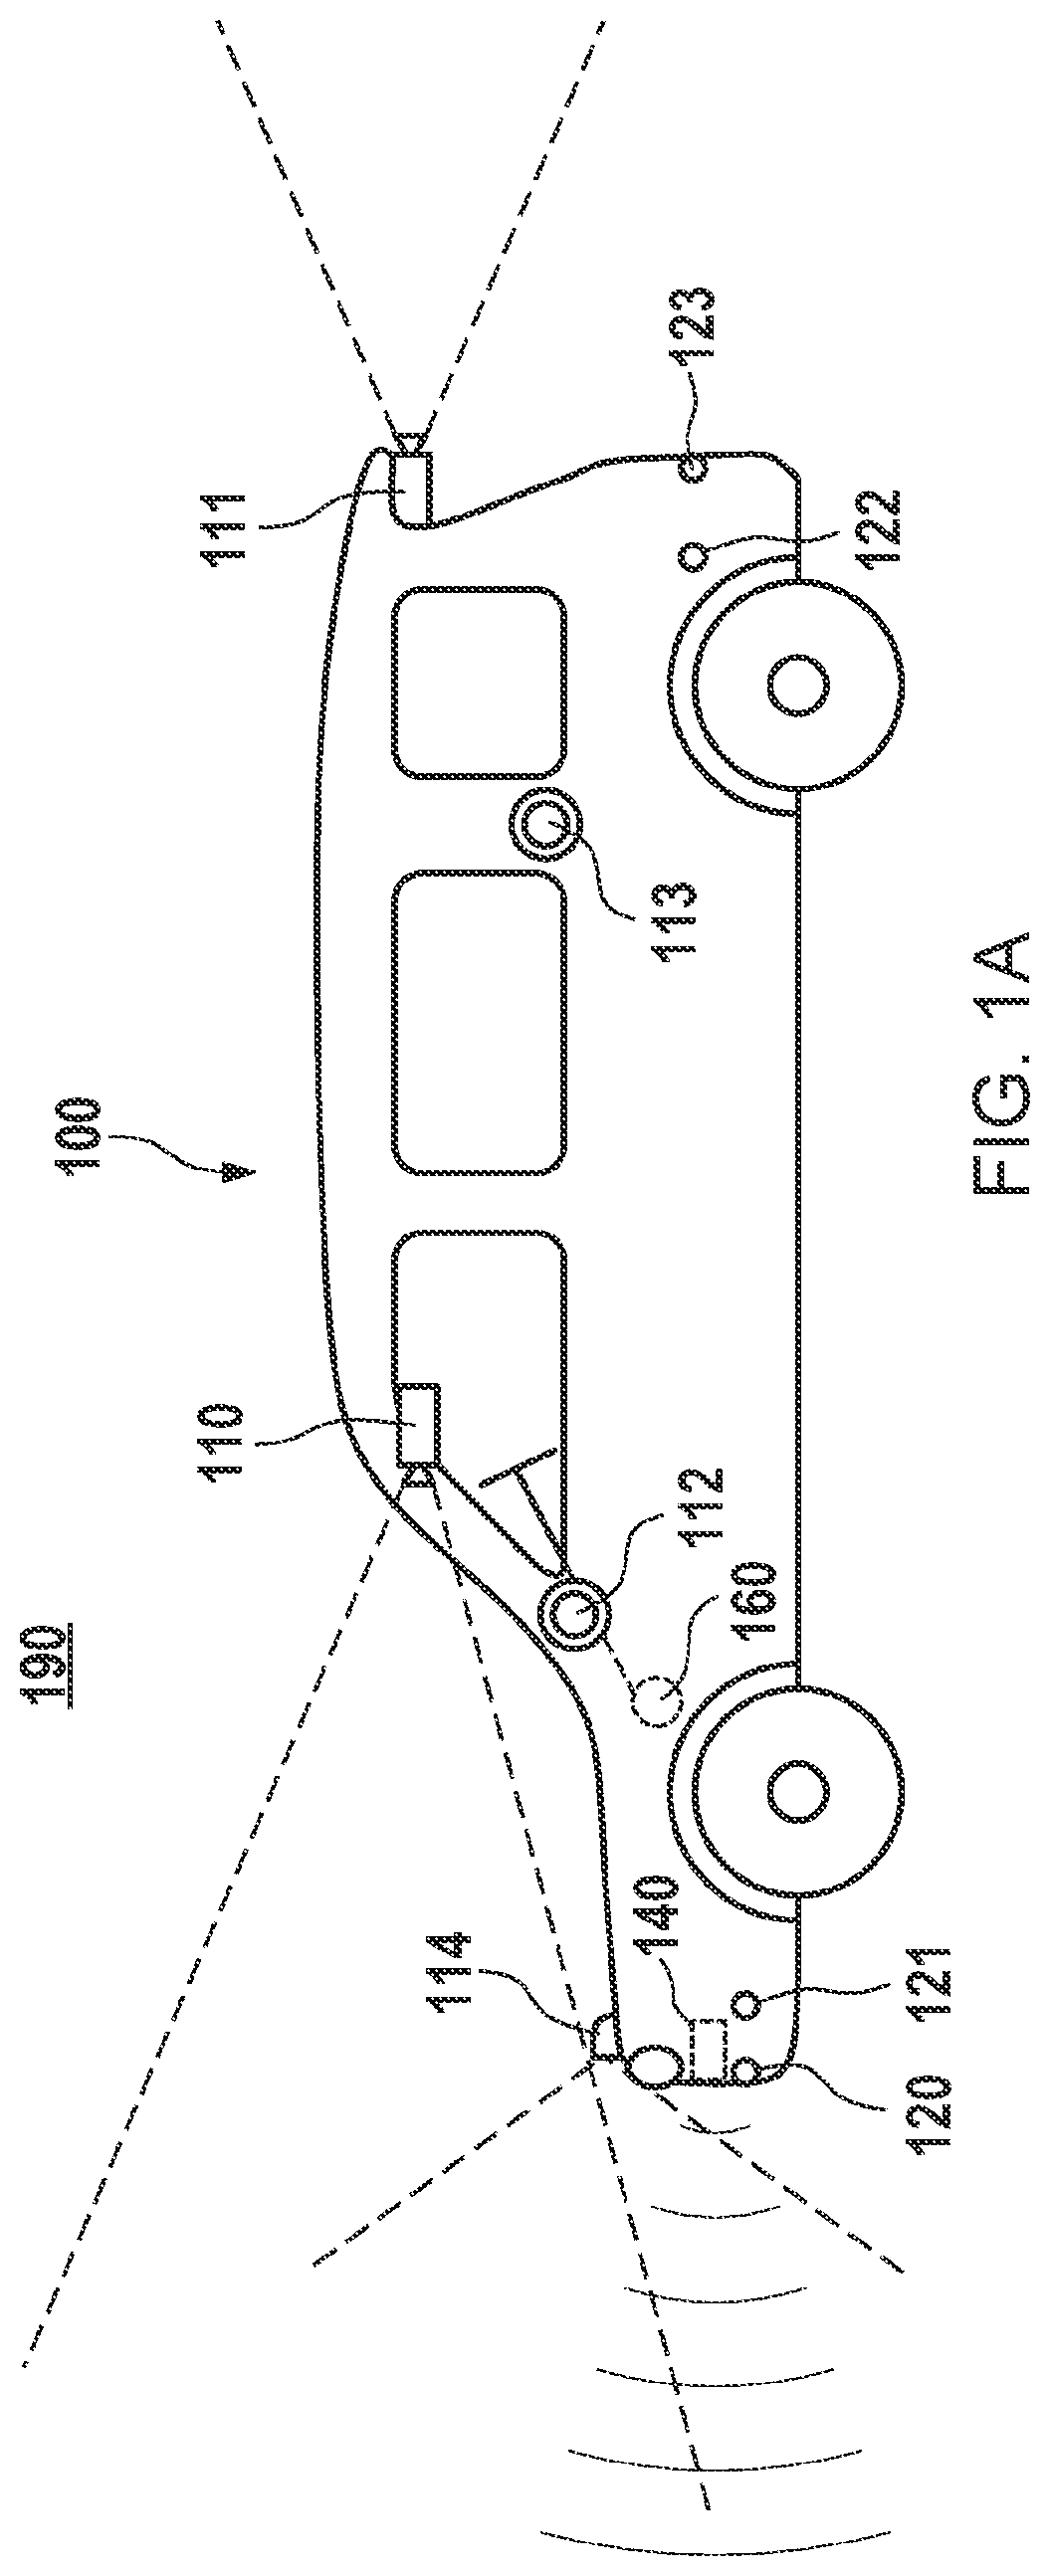 Method for detecting an operating capability of an environment sensor, control unit and vehicle